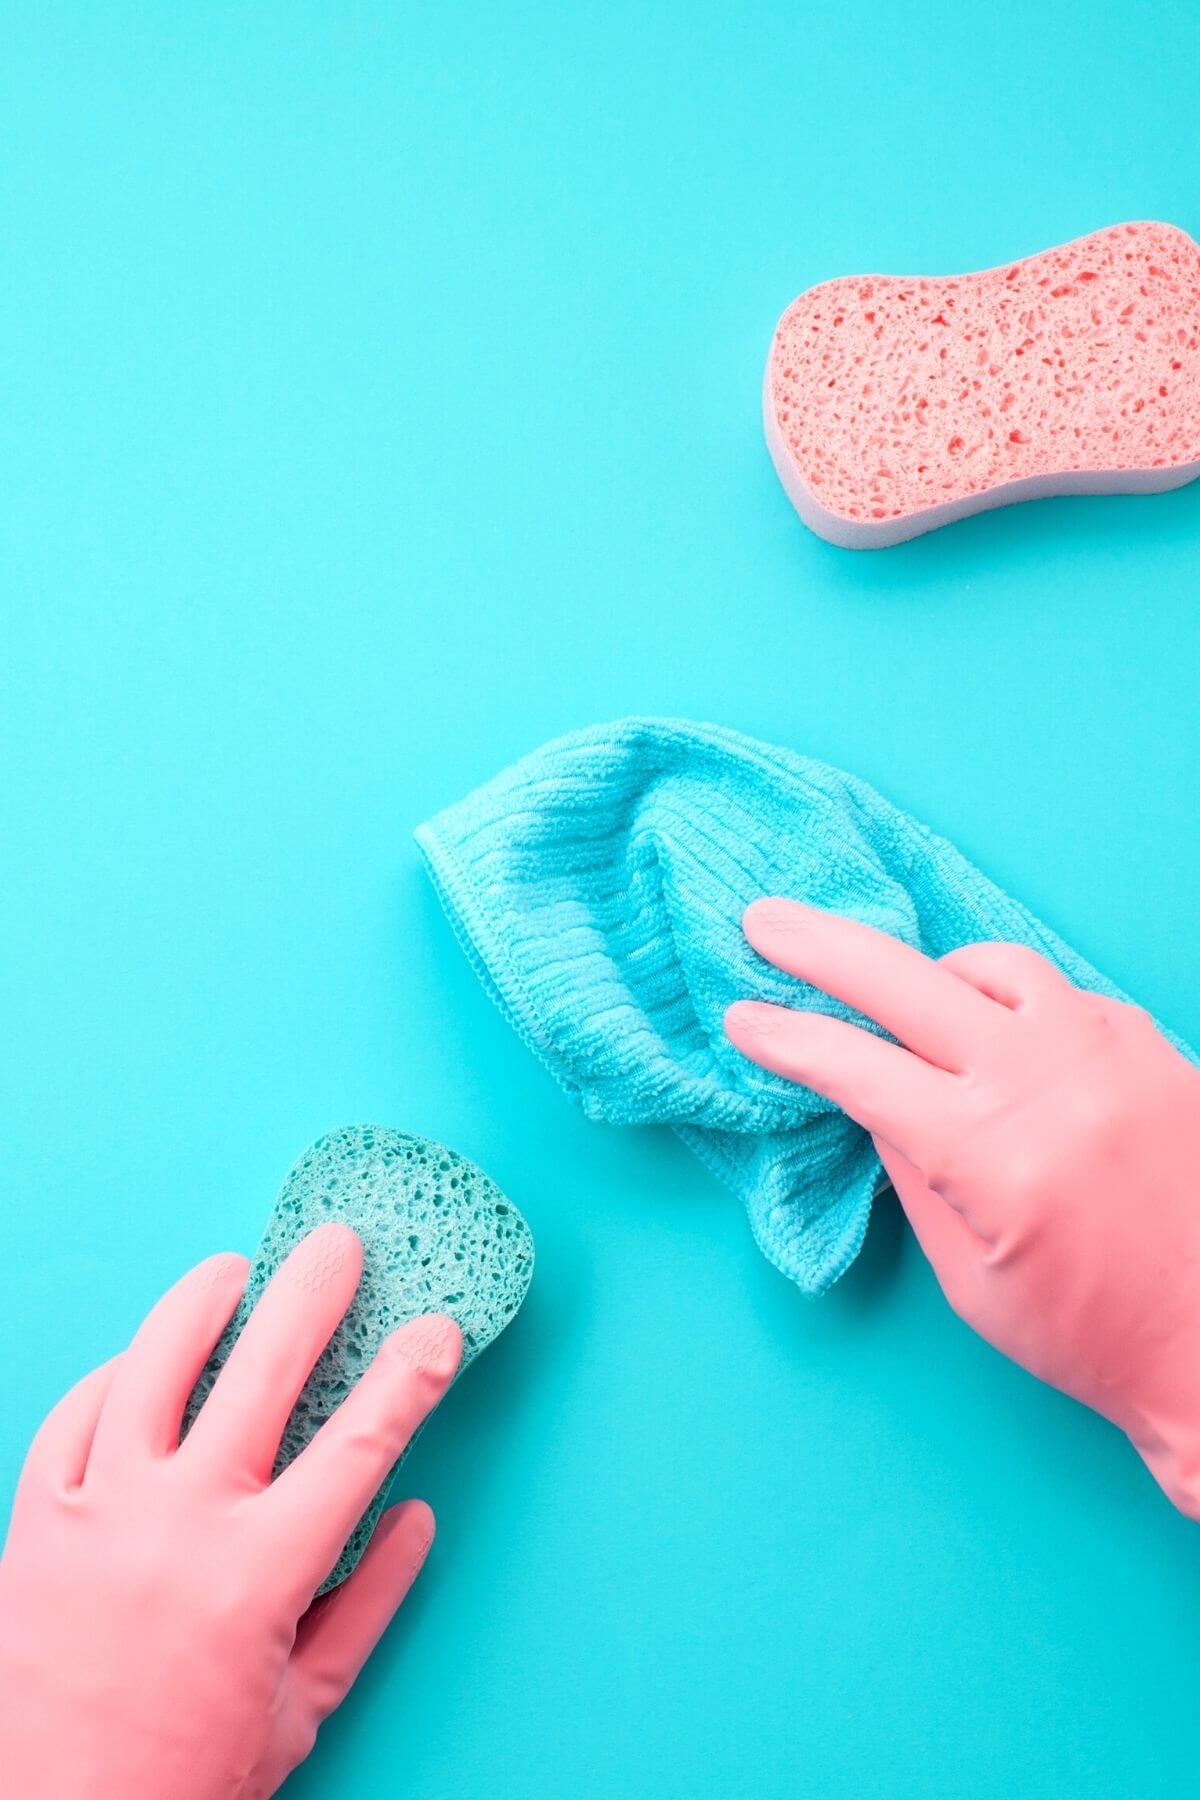 Household cleaning sponges you're forgetting to replace